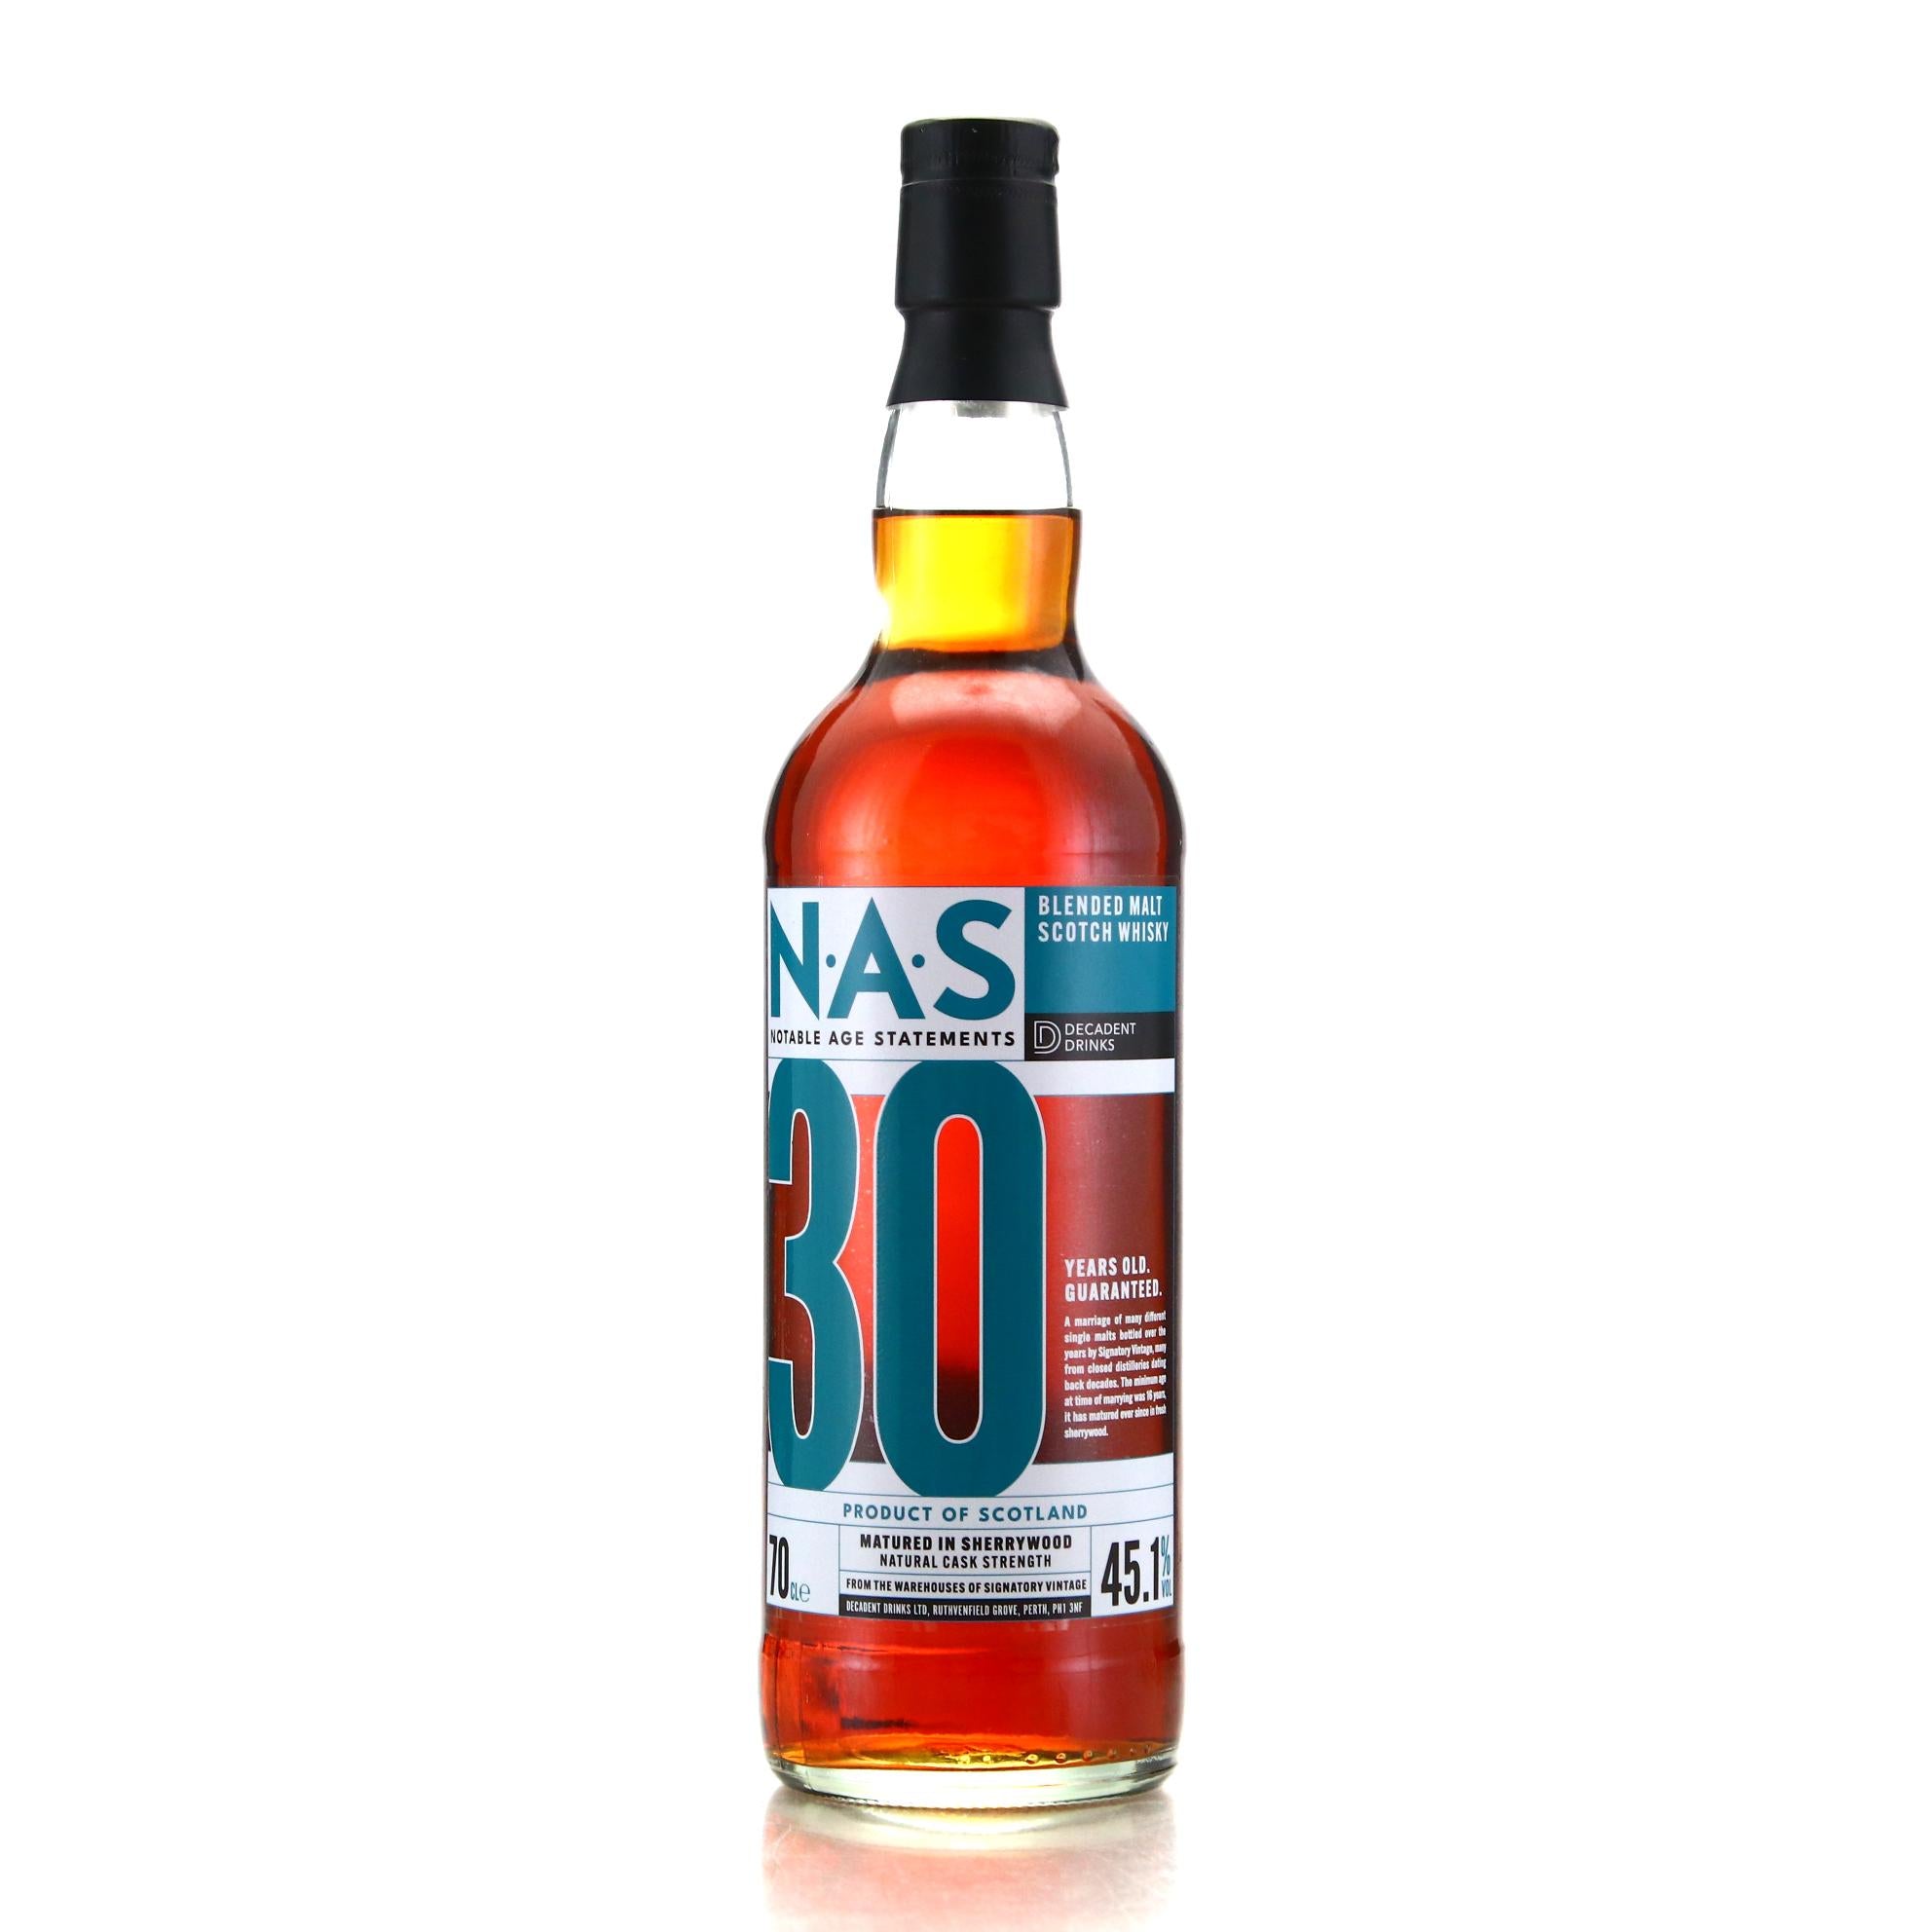 Decadent Drinks NAS 30 Year Old Blended Malt Edition No.1 45.1